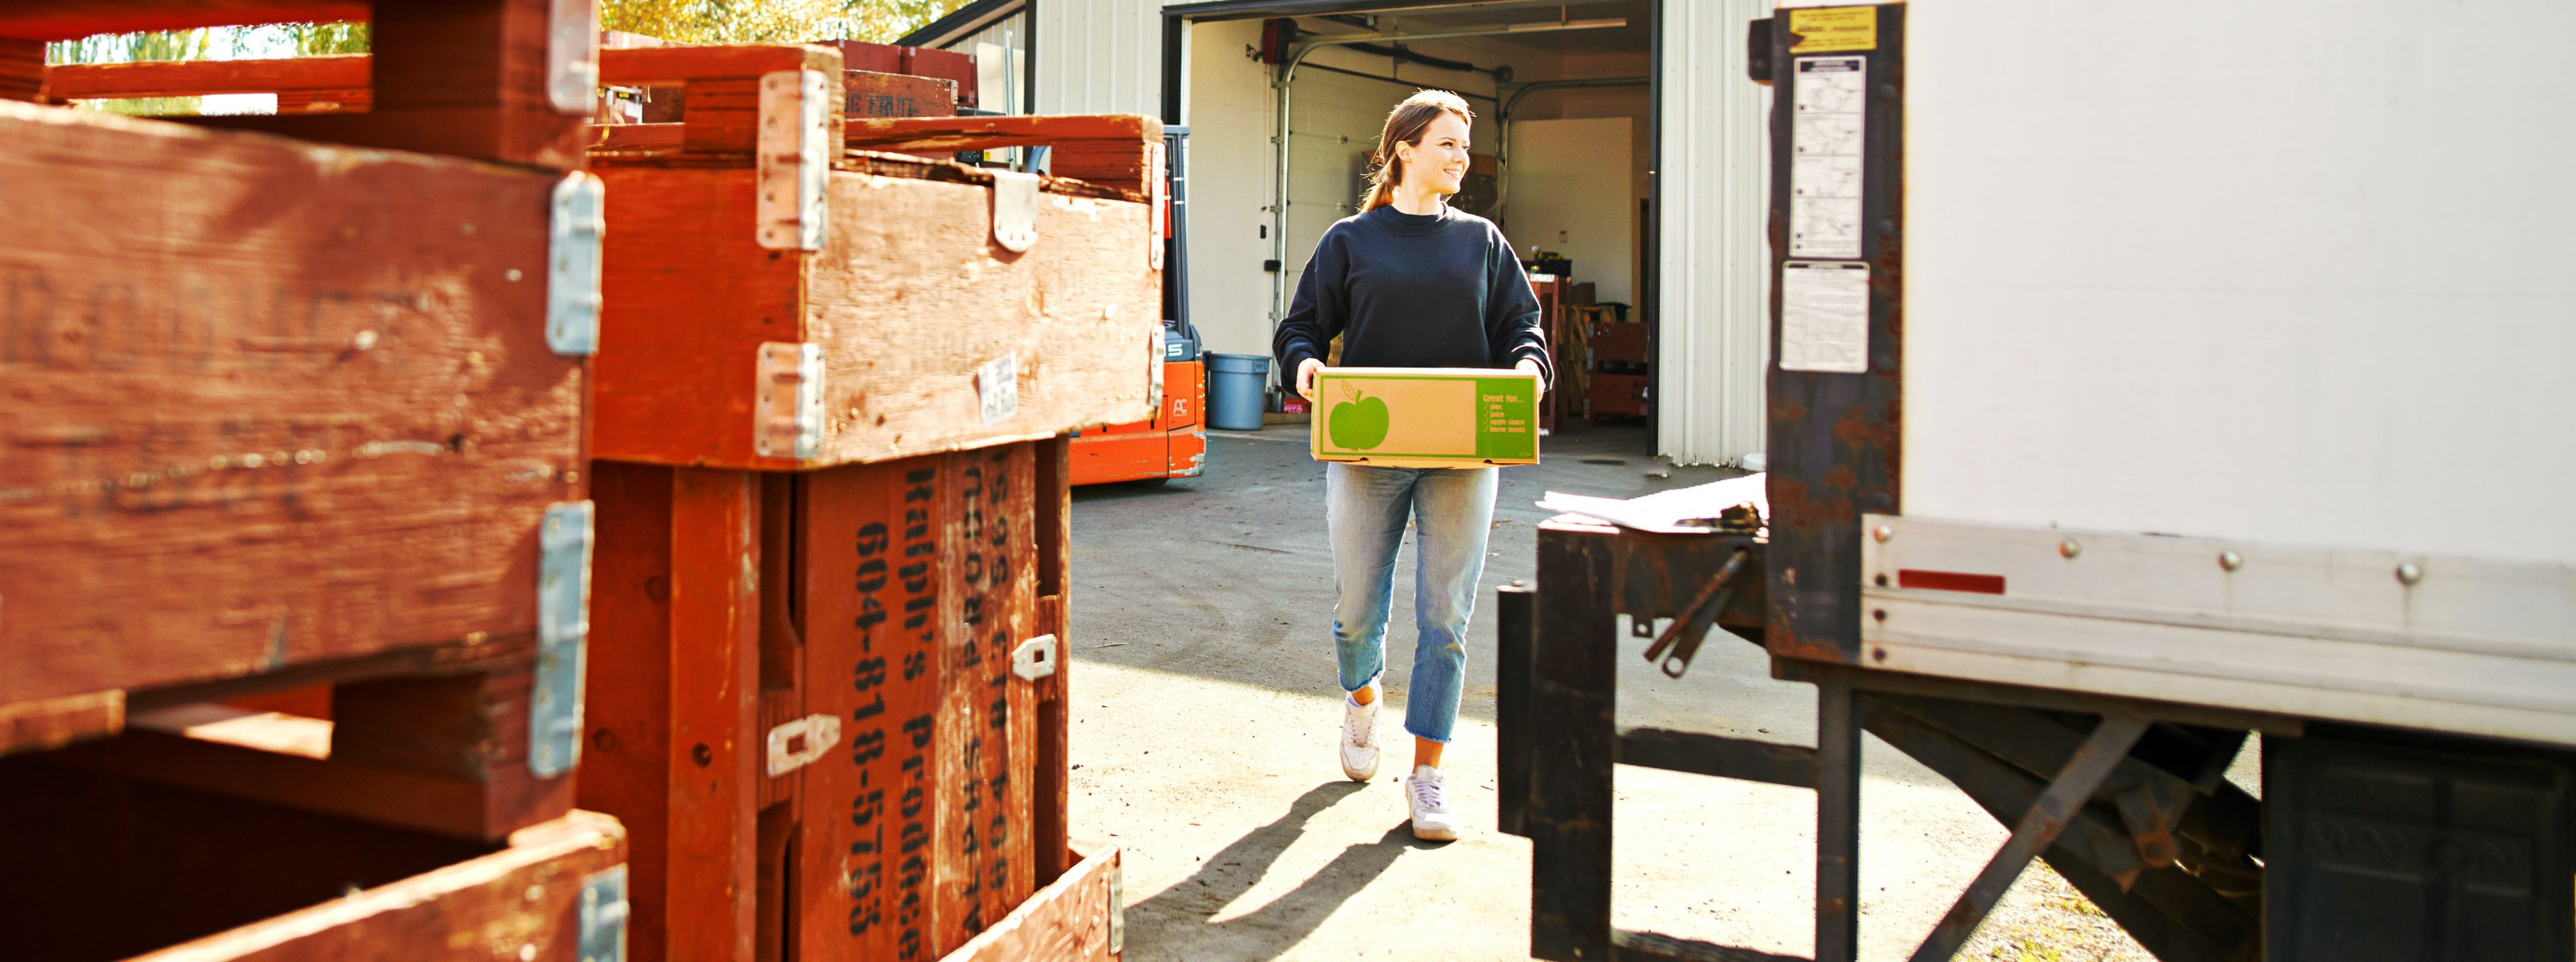 A smiling woman carries a box of produce from a warehouse toward a truck.